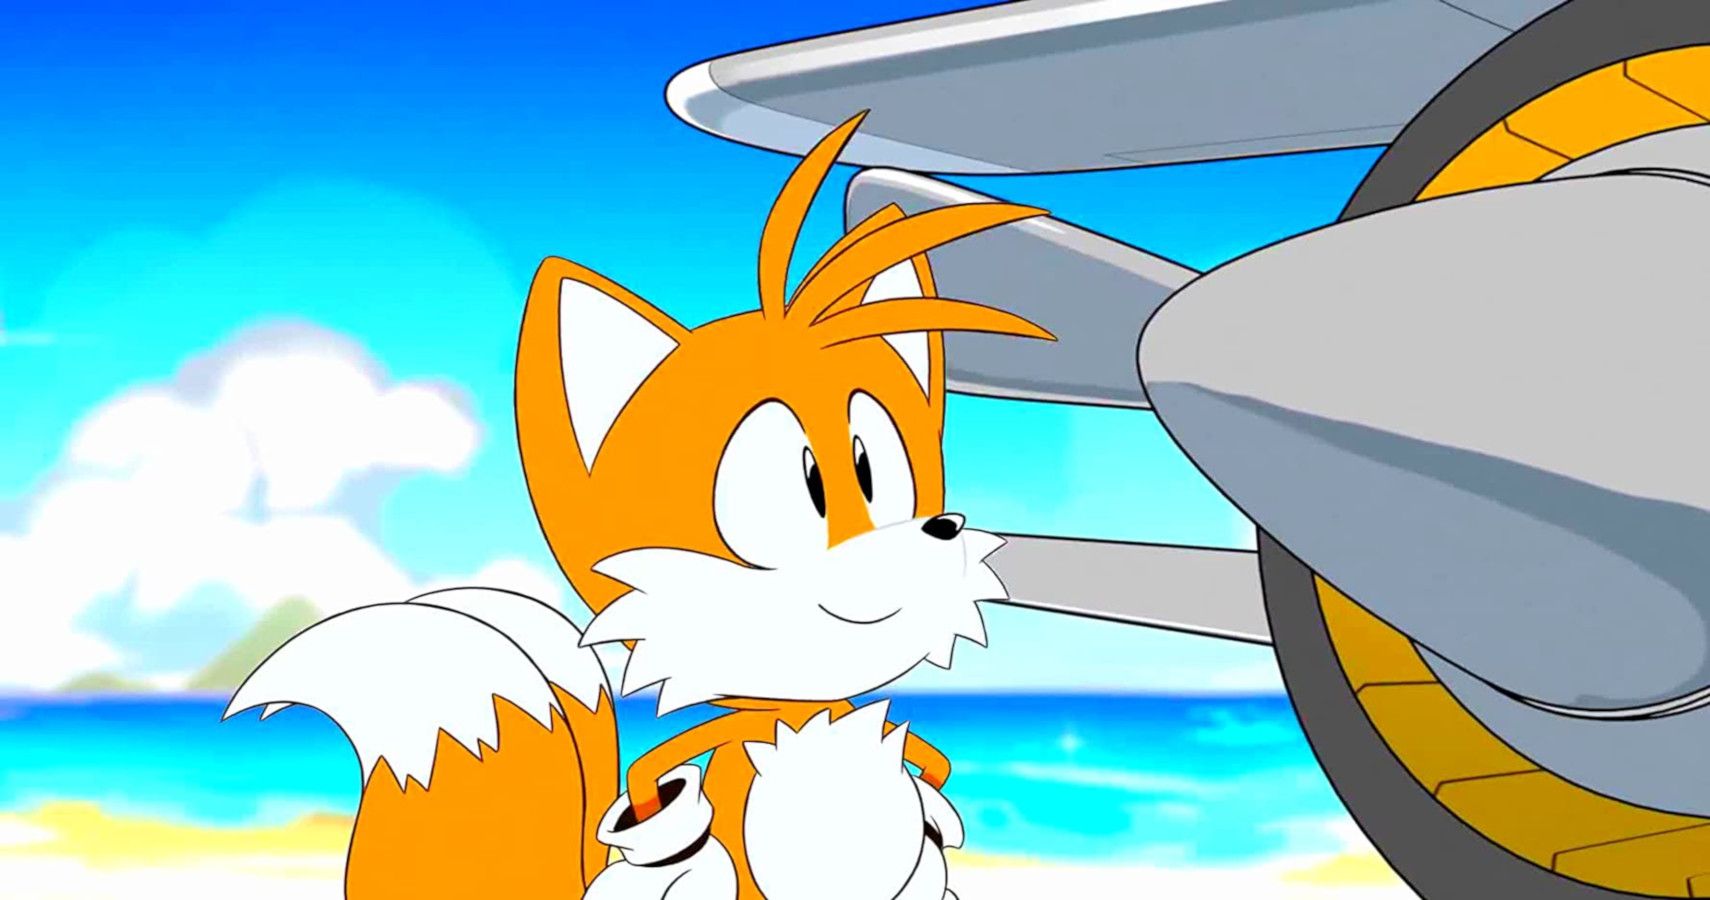 We've Got The Prower: Why Tails Is The Best Part Of Sonic The Hedgehog